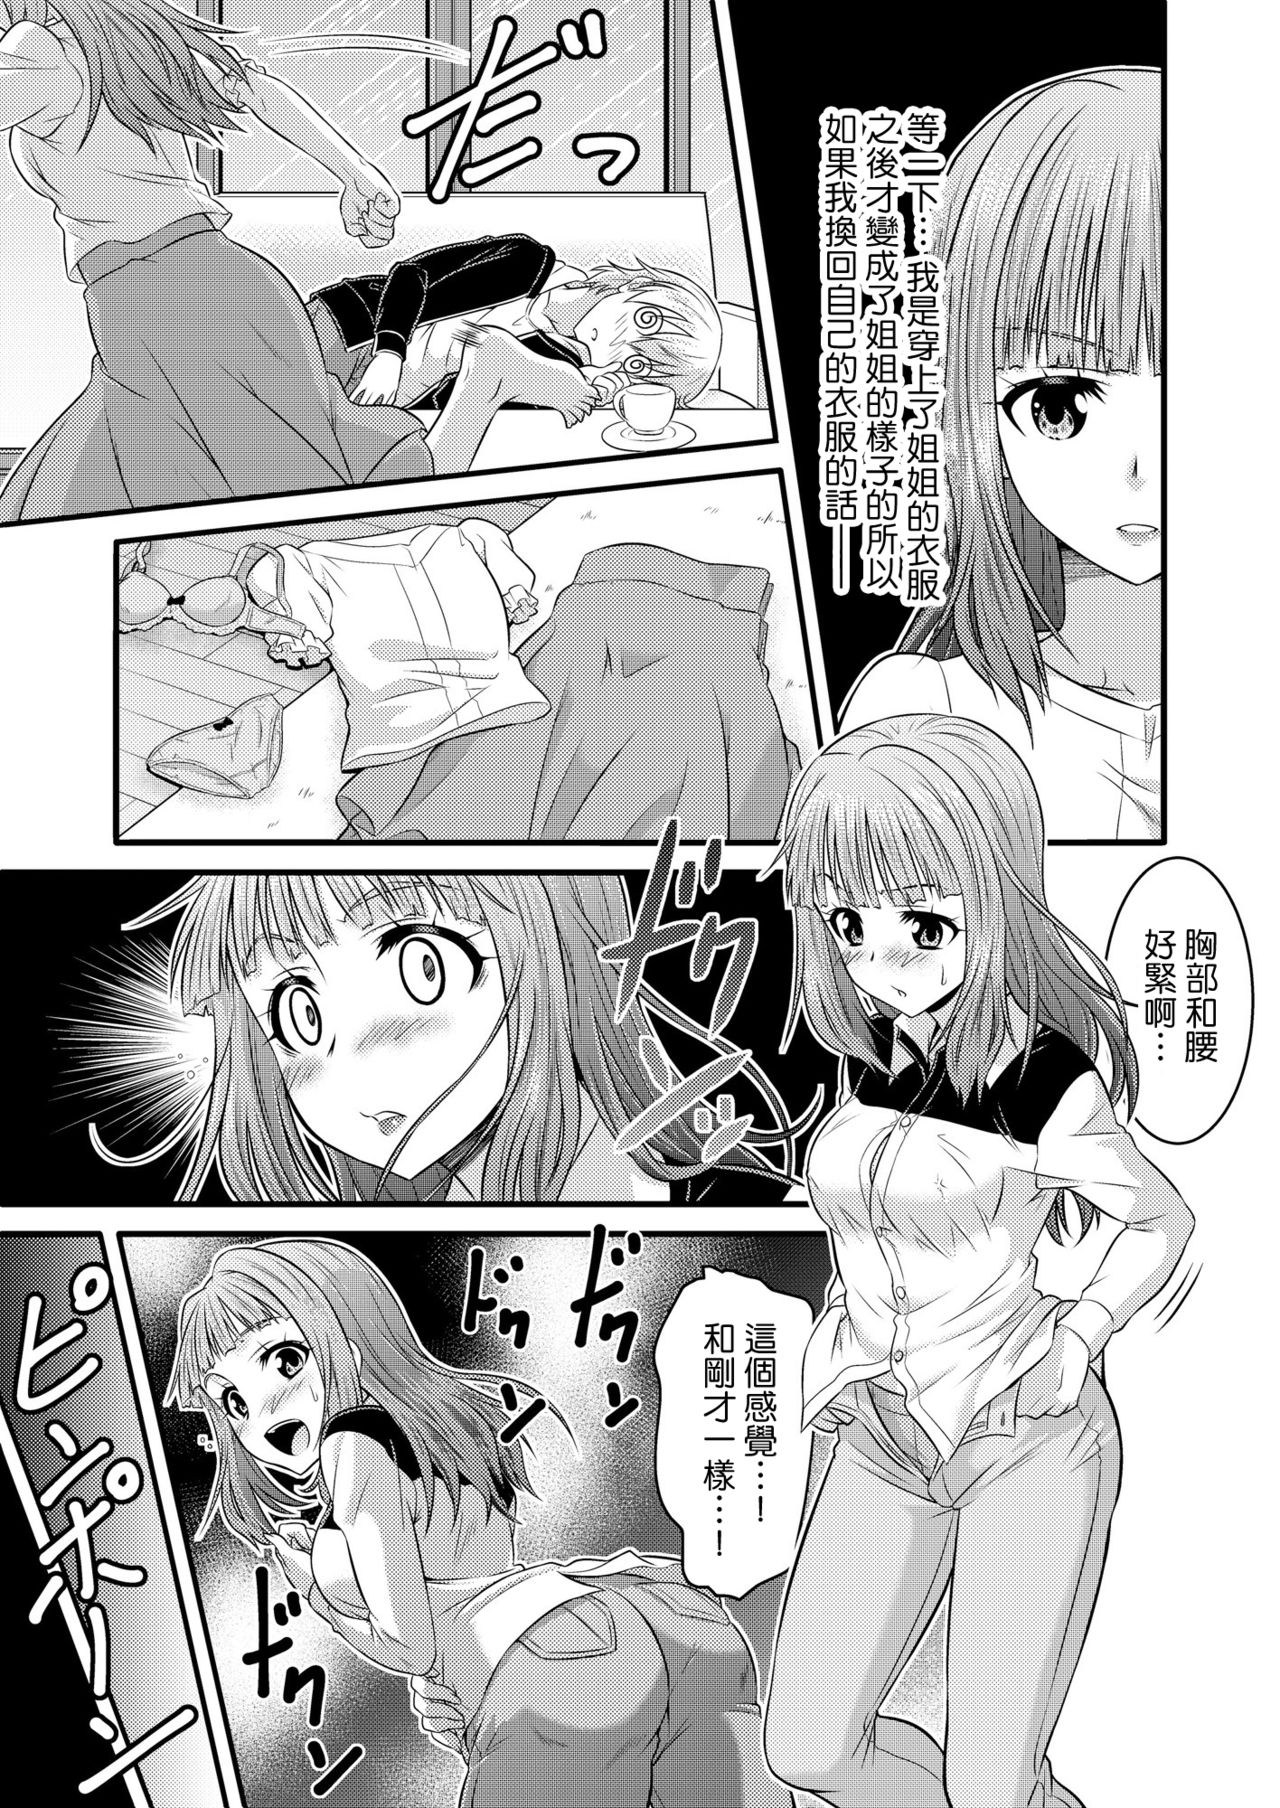 Metamorph ★ Coordination - I Become Whatever Girl I Crossdress As~ [Sister Arc, Classmate Arc] [Chinese] [瑞树汉化组] page 16 full